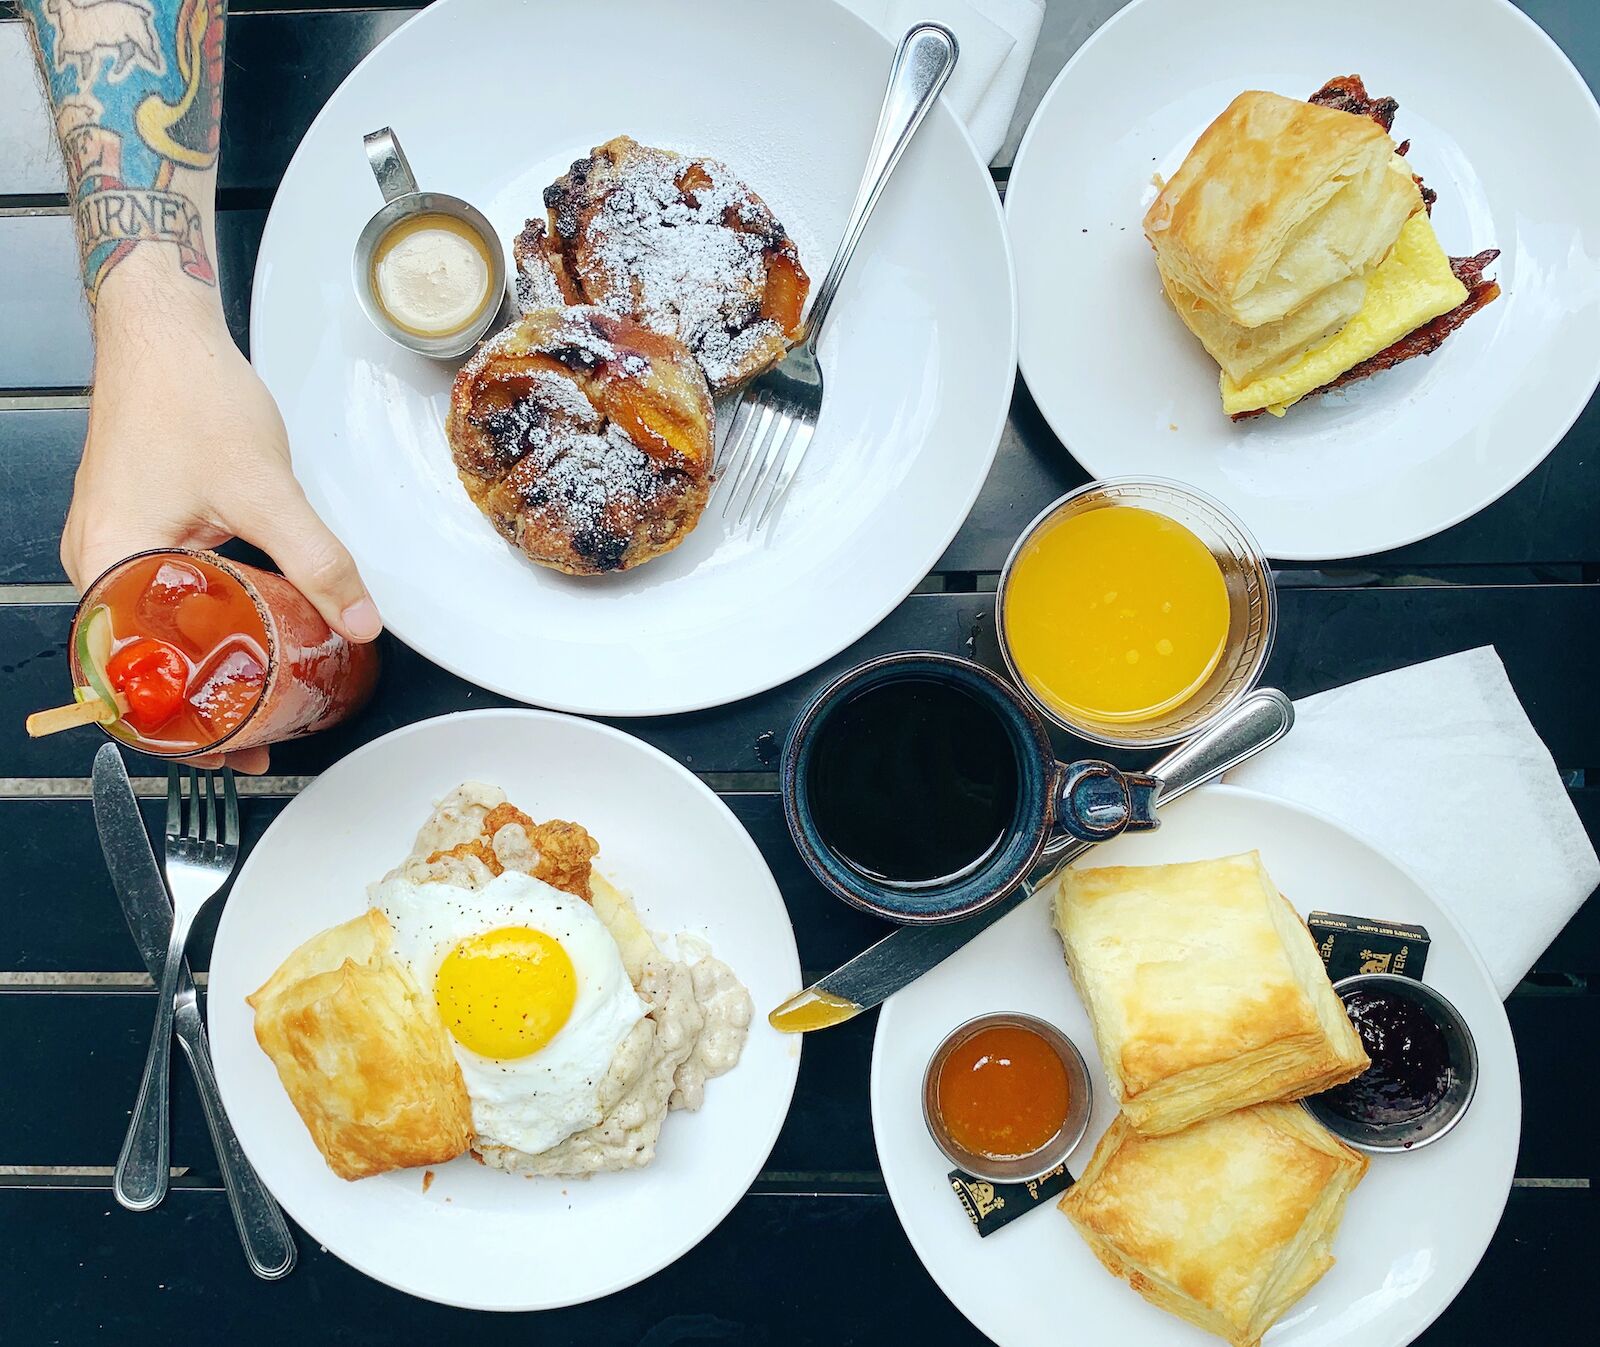 Breakfast dishes on the table at Biscuit Love, Nashville brunch